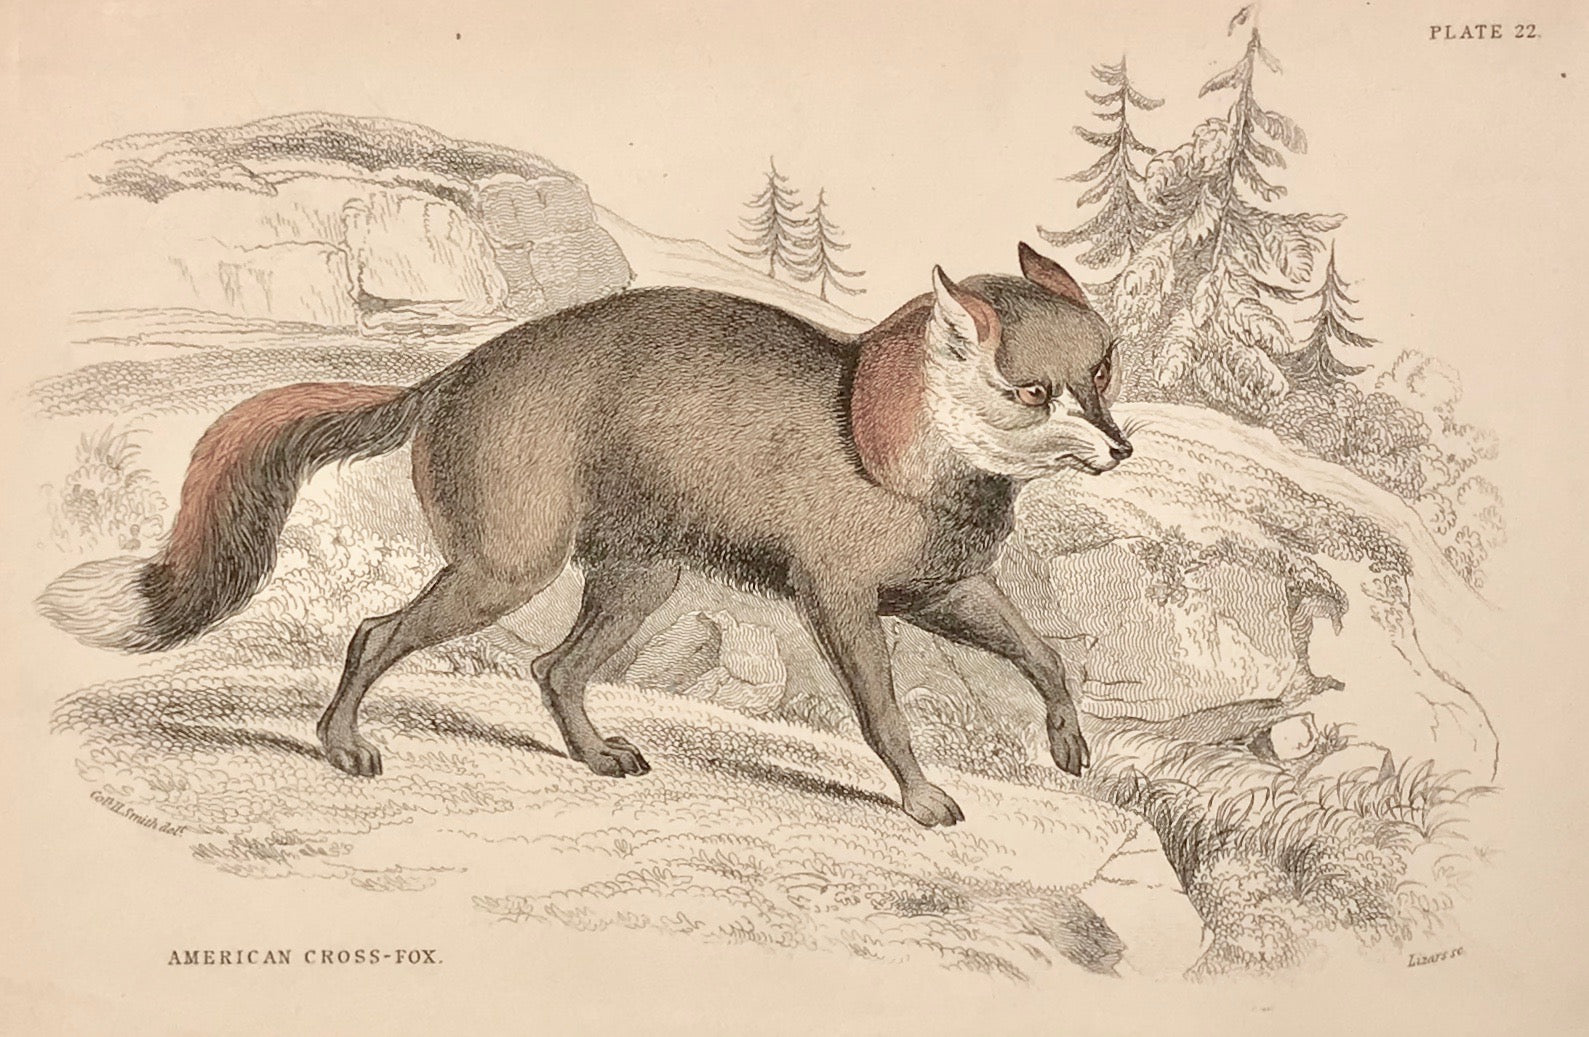 American Cross Fox  Steel engraving by Lizars in original hand coloring. From "Naturalist´s Library", ca 1860.